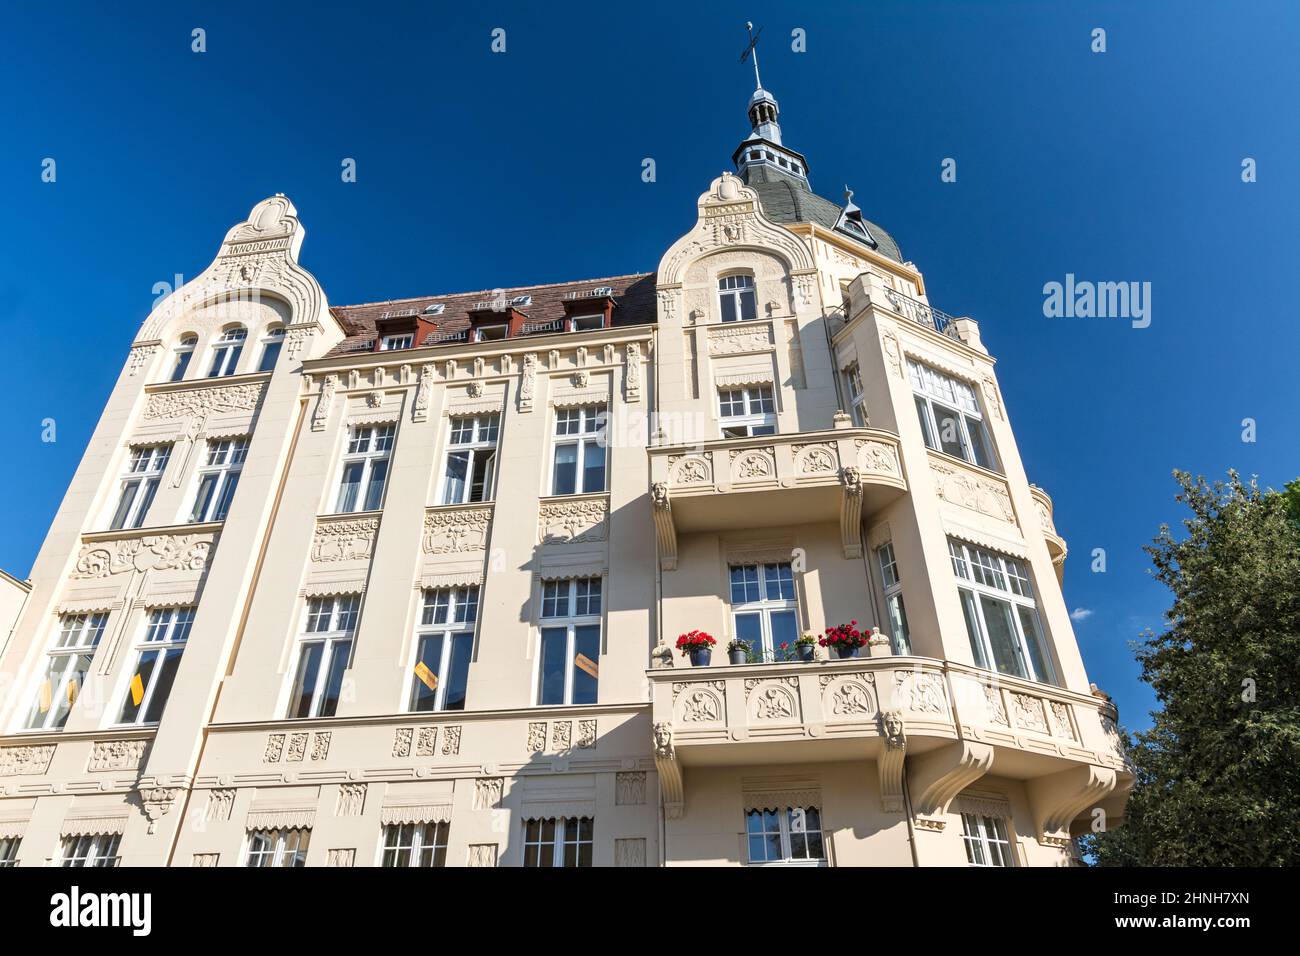 Facade of beautiful historic apartment building under blue skies Stock Photo